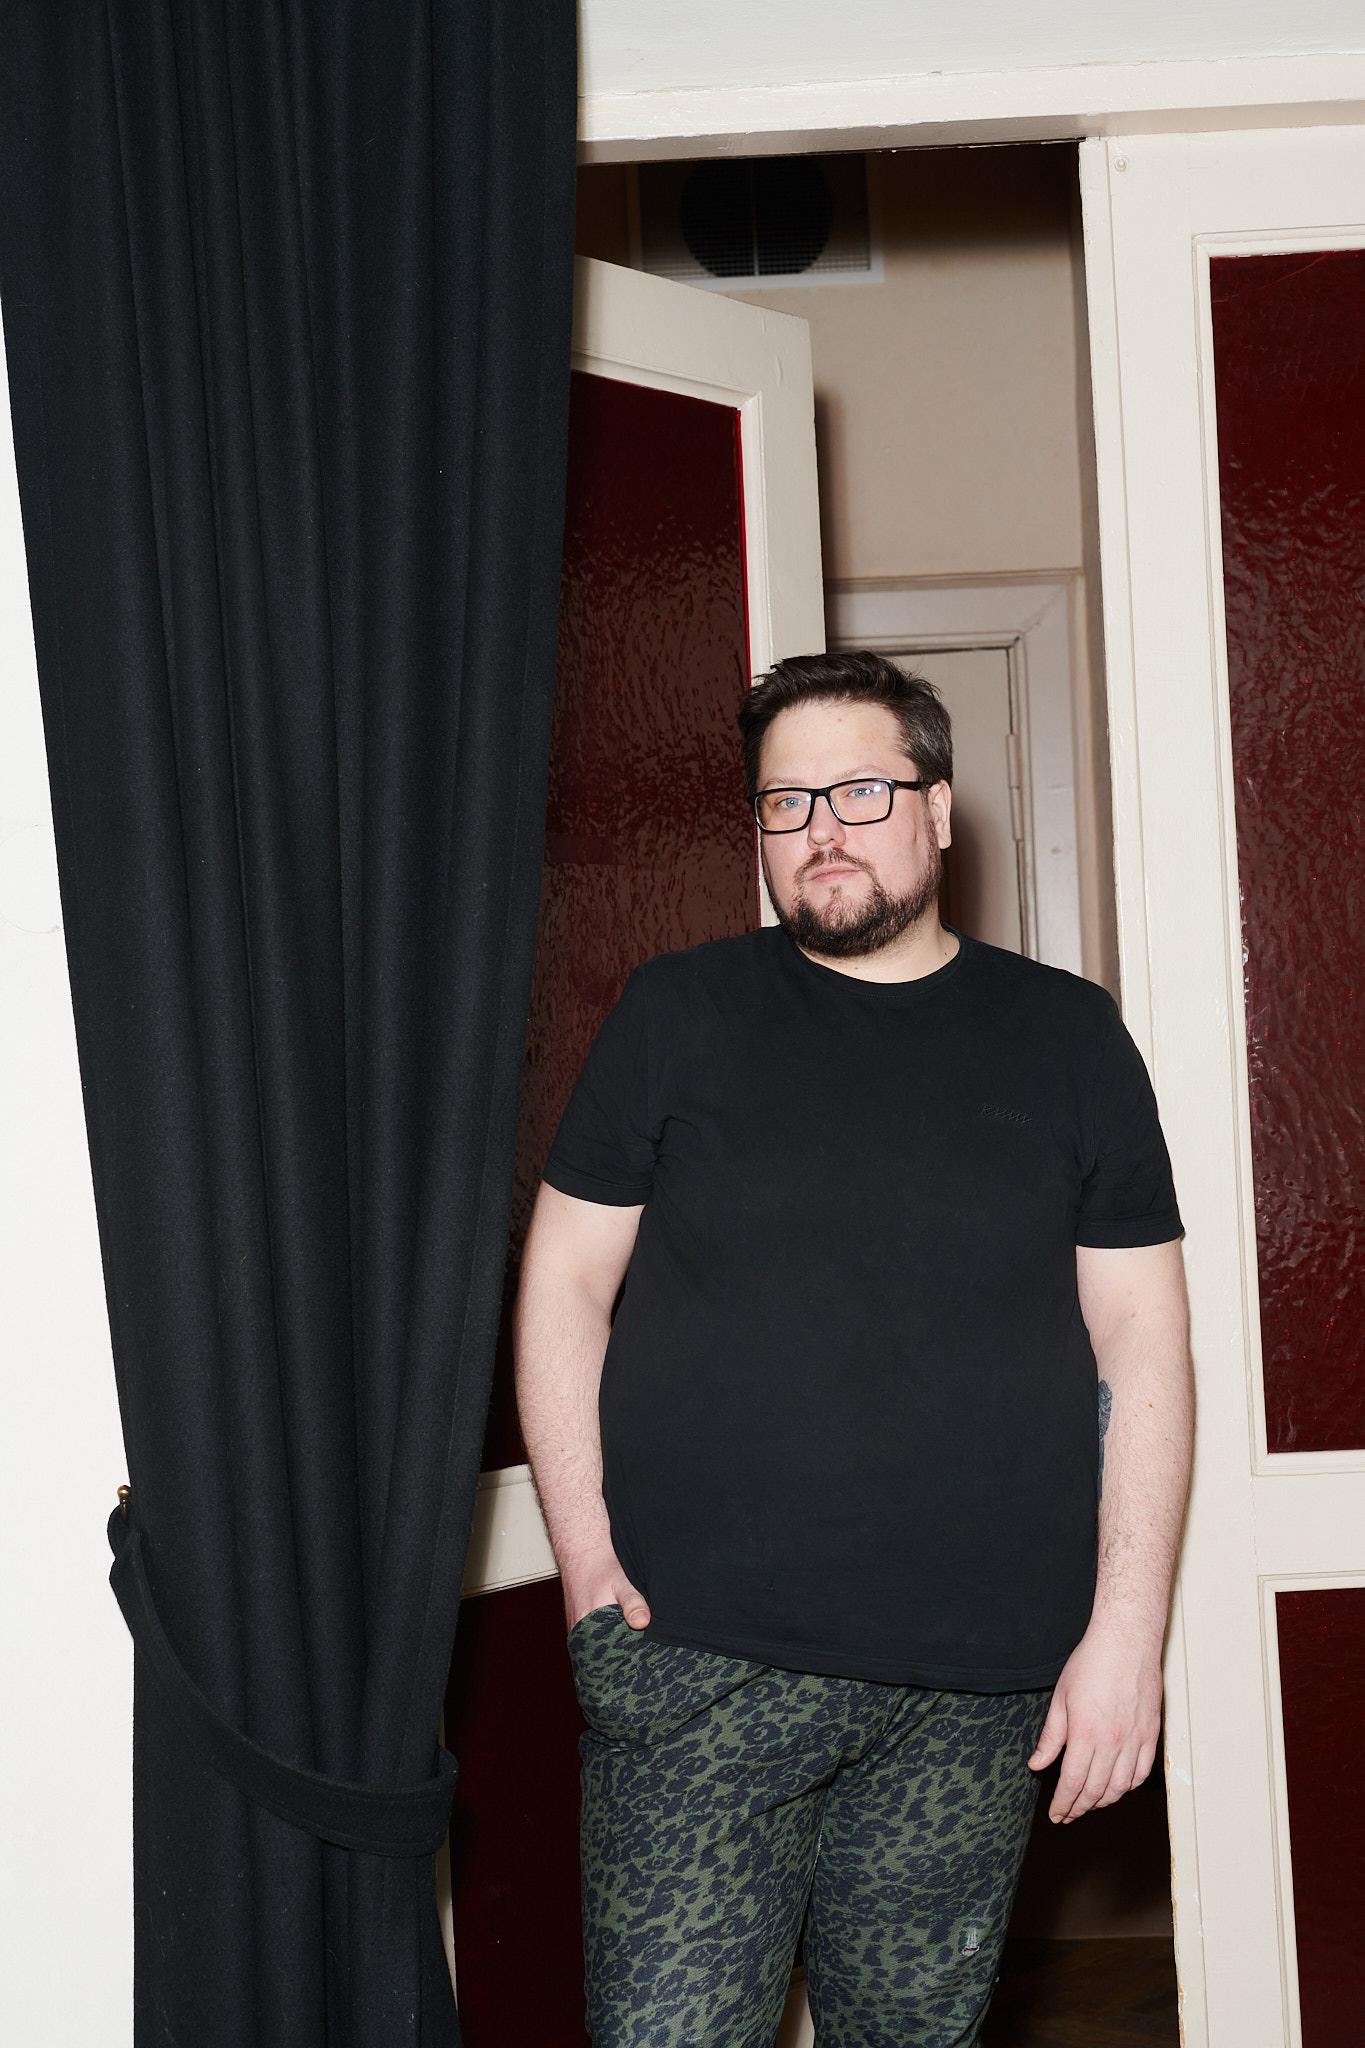 Edvinas Grinkevičius, a white-skinned person with dark brown short hair, dark brown beard, eyeglasses. Framed from knees up, Edvinas is wearing a black t-shirt, dark jeans and is leaning towards a door opening. A black curtain is on the left of Edvinas.